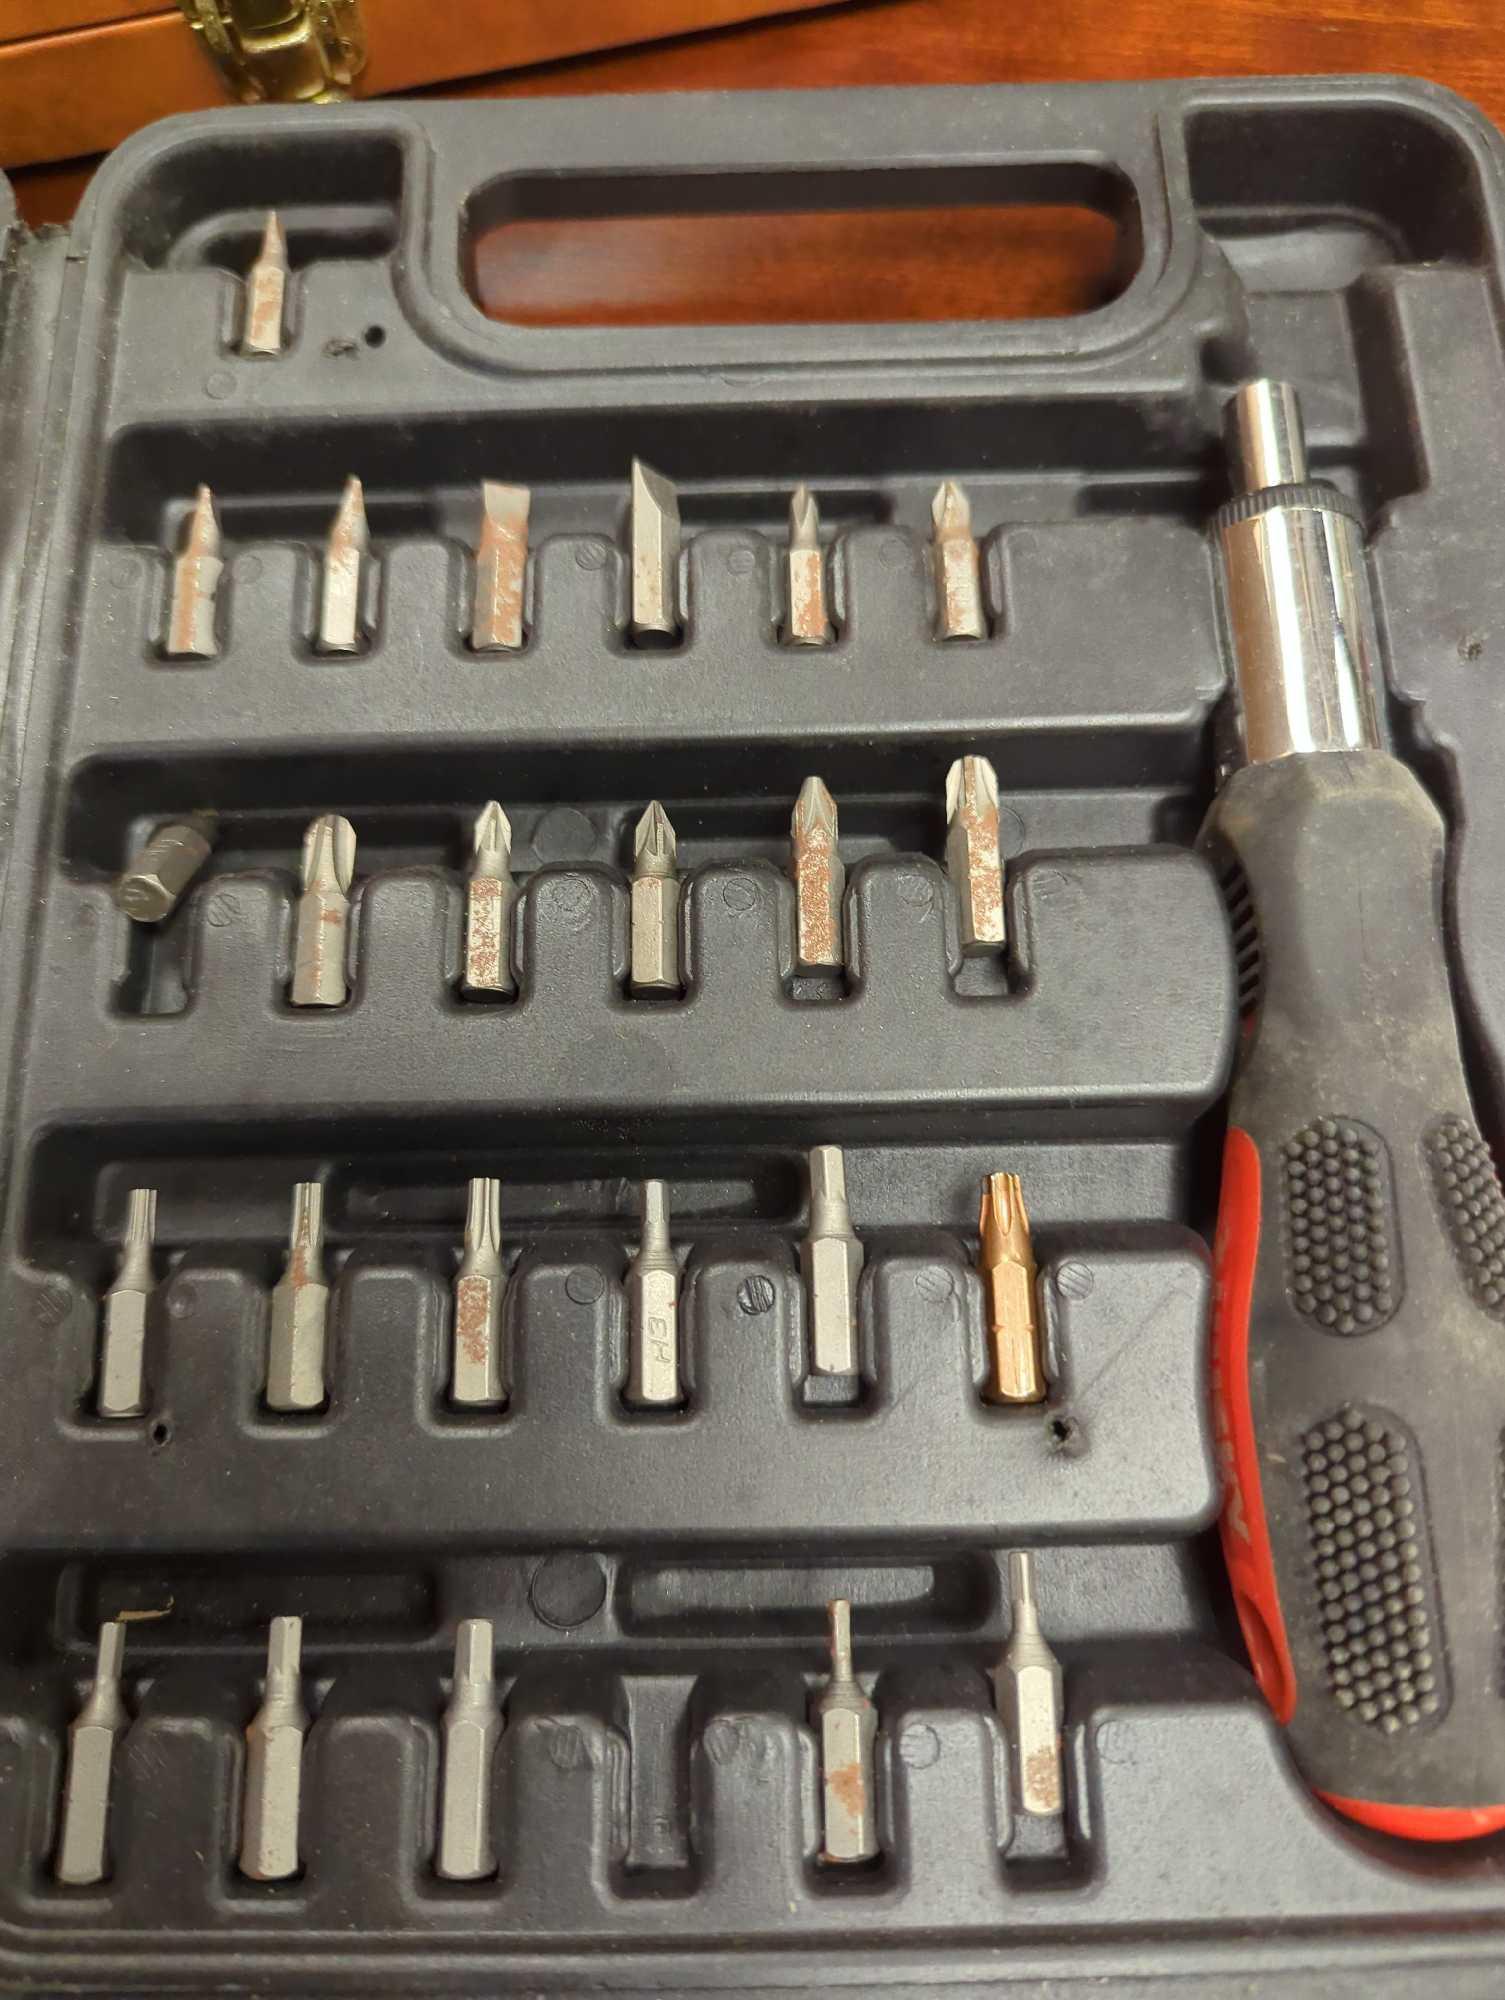 Husky 48 pc Ratcheting Screwdriver Set w/Case, Item Is MISSING Some Attachments What you see in